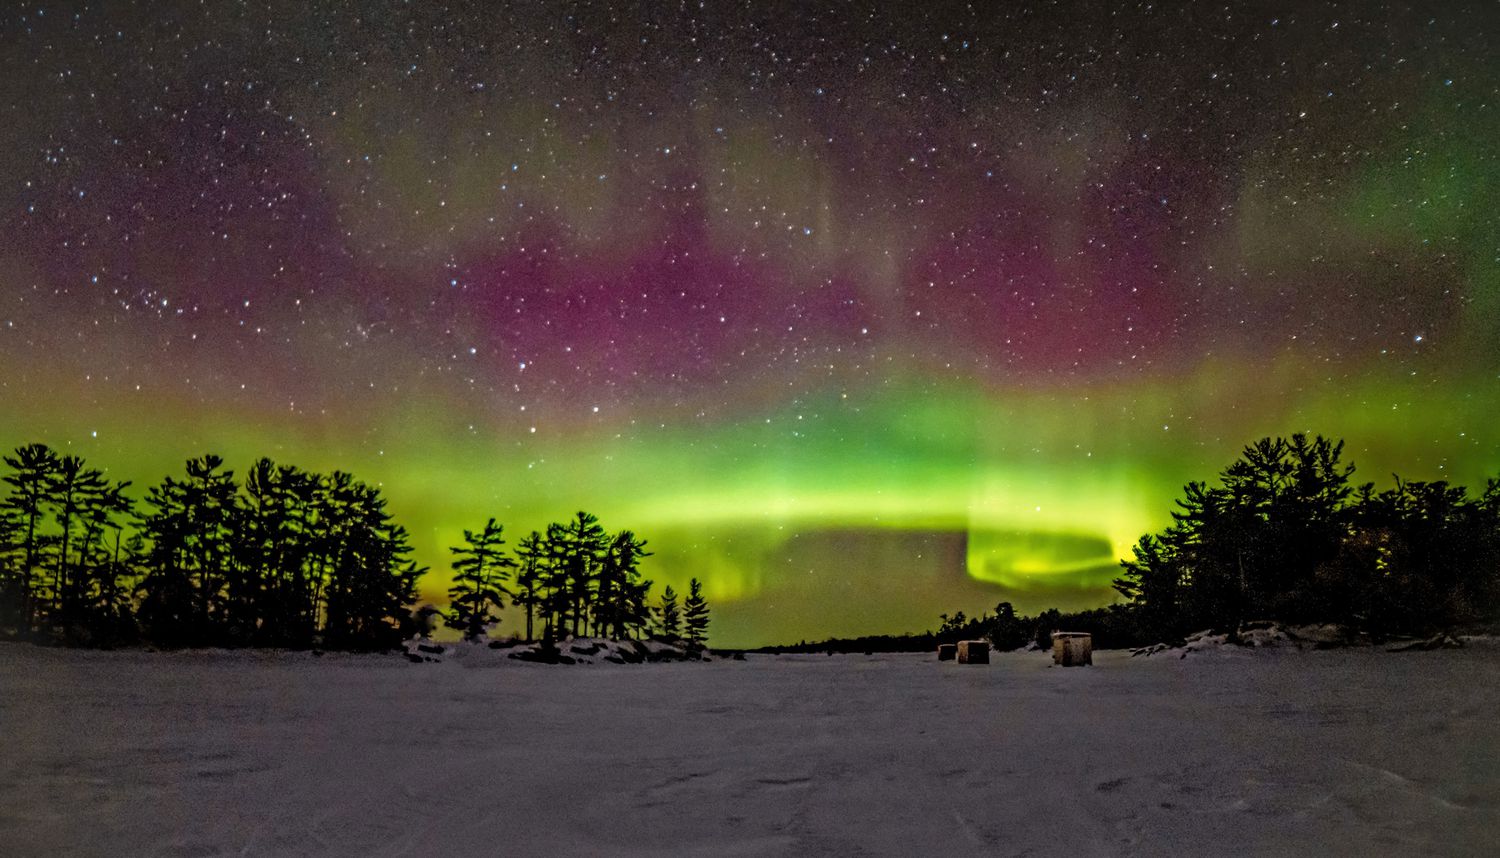 The Northern Lights in Voyageurs National Park